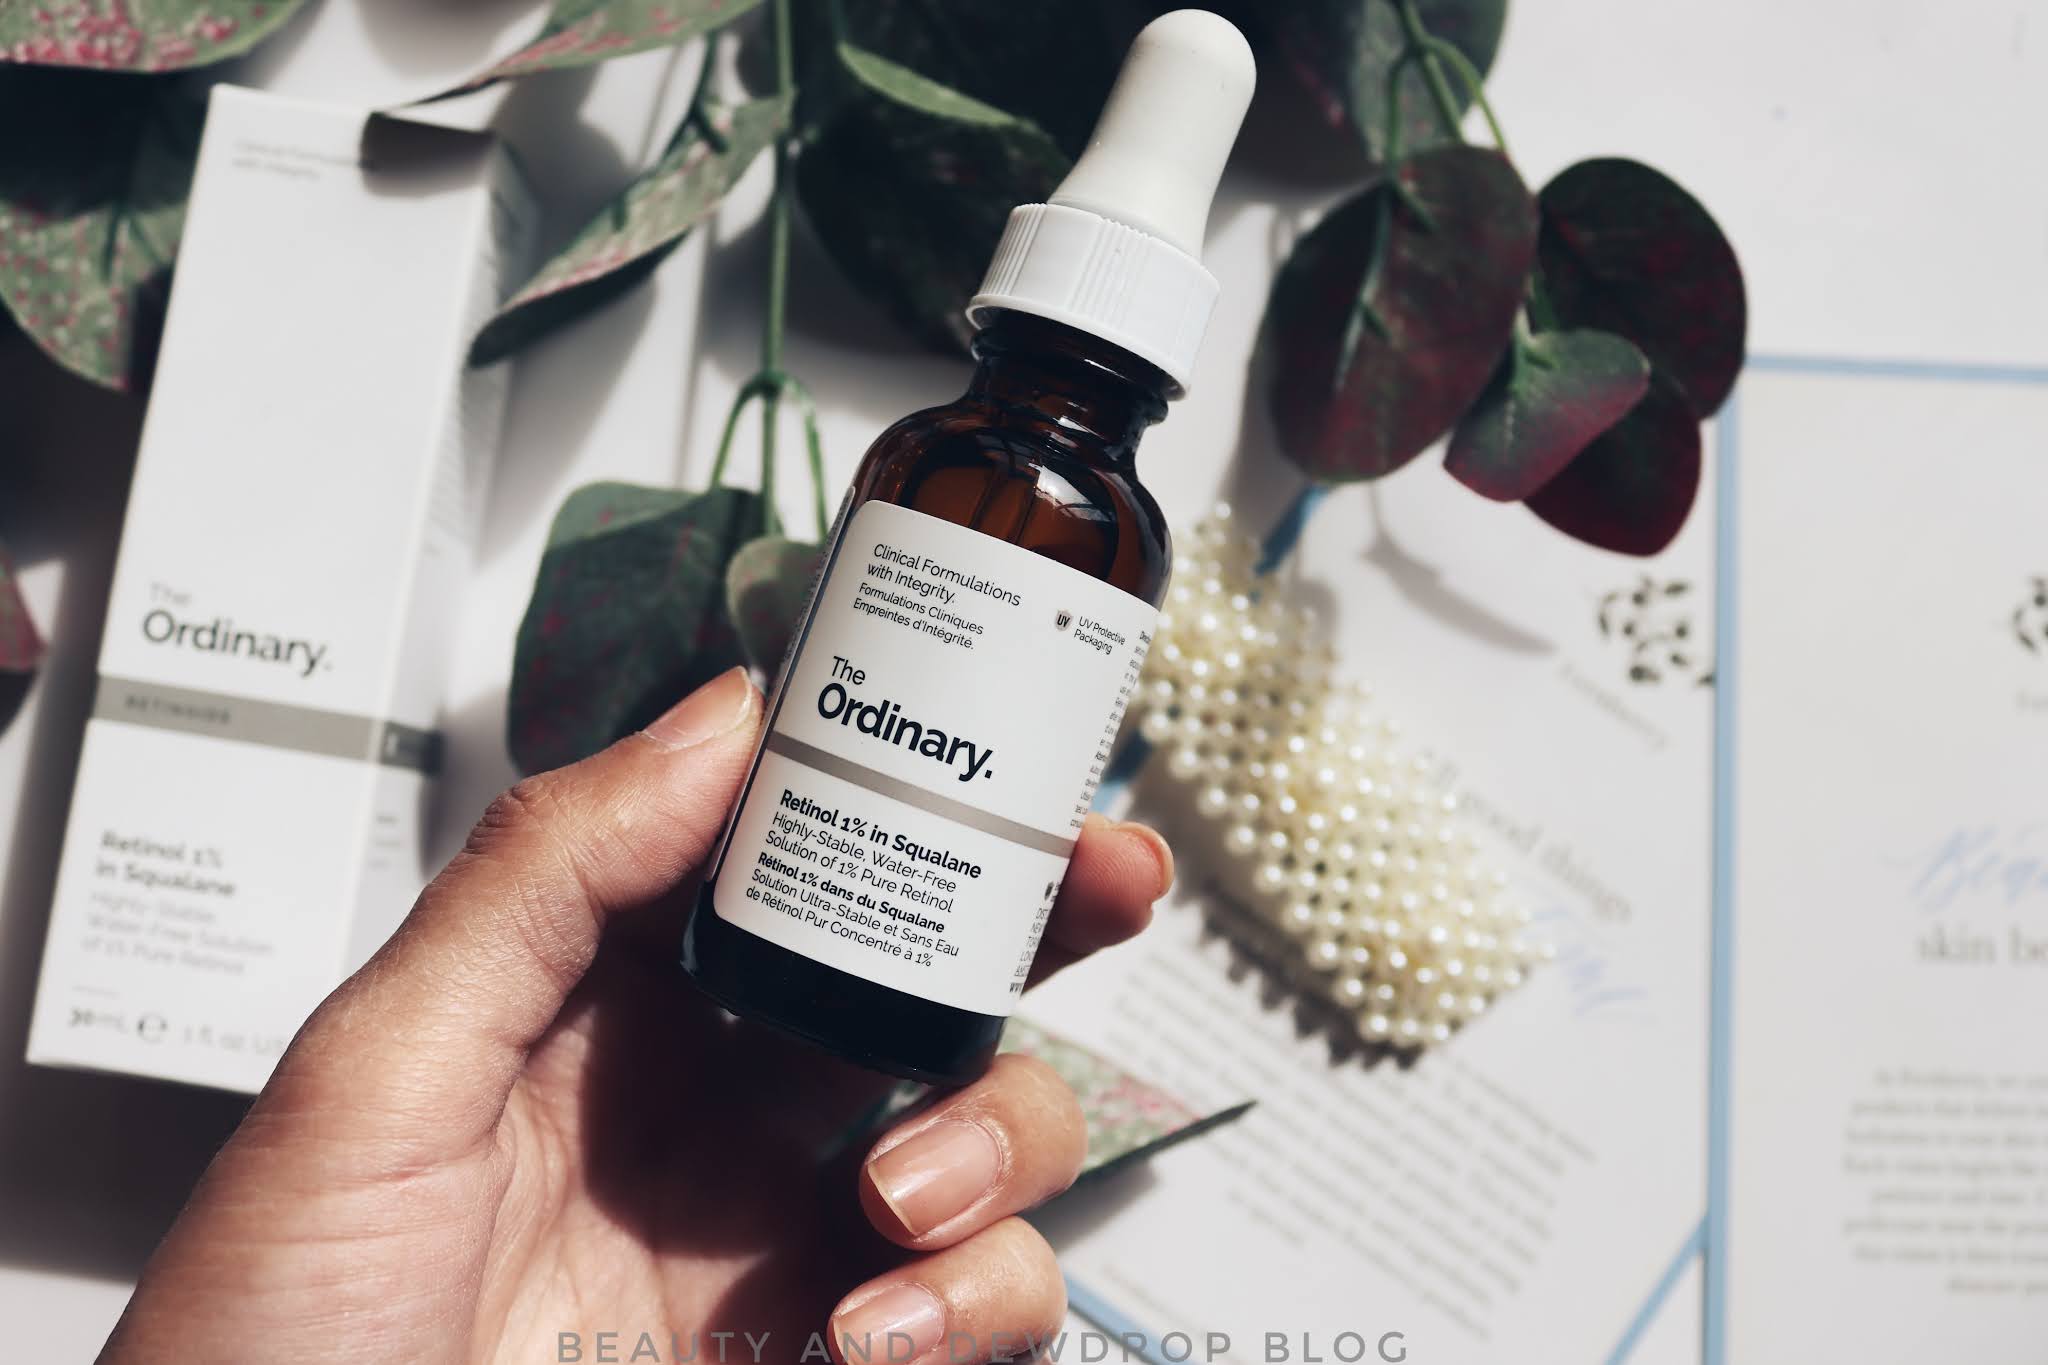 sand ulovlig emulsion Beauty & Dewdrop Blog: The Ordinary Retinol 1% in Squalane Review